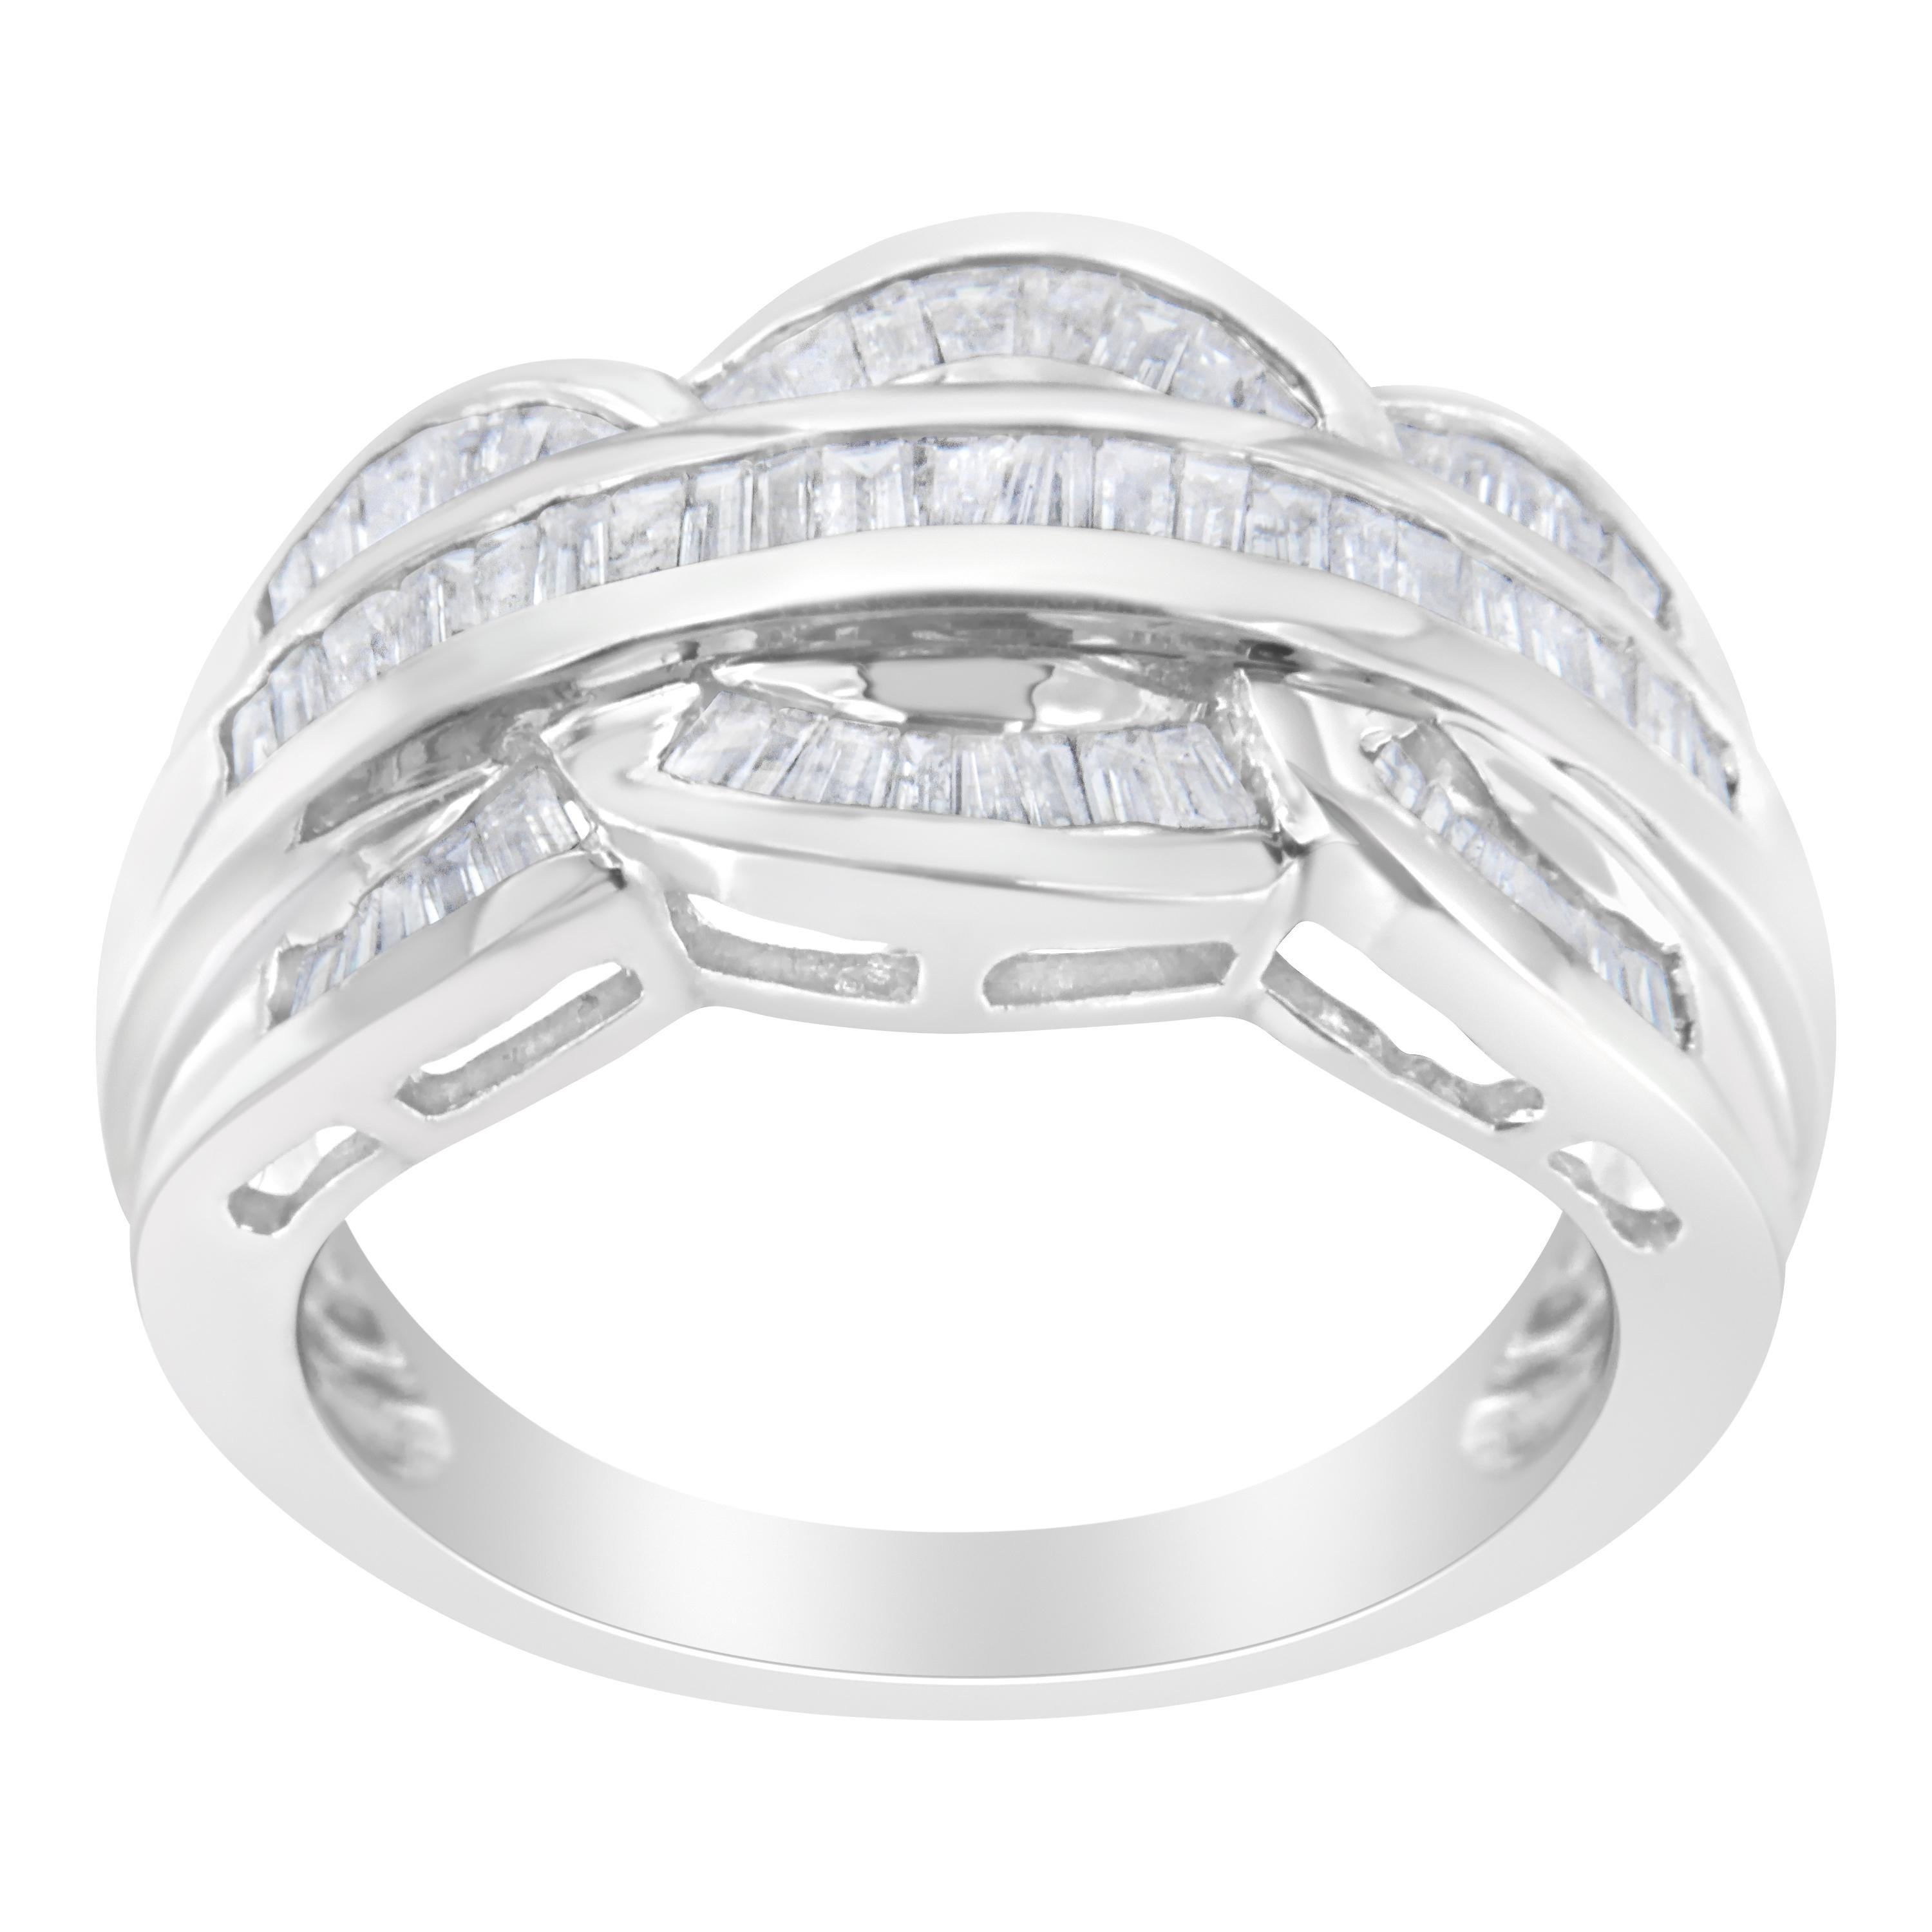 This 14 karat white gold band features three rows of baguette diamonds with an elegant arched design. The stylish ring has a total diamond weight of 1 1/2 carats. This is a rare one-of-a-kind piece, and will be a unique addition to your jewelry